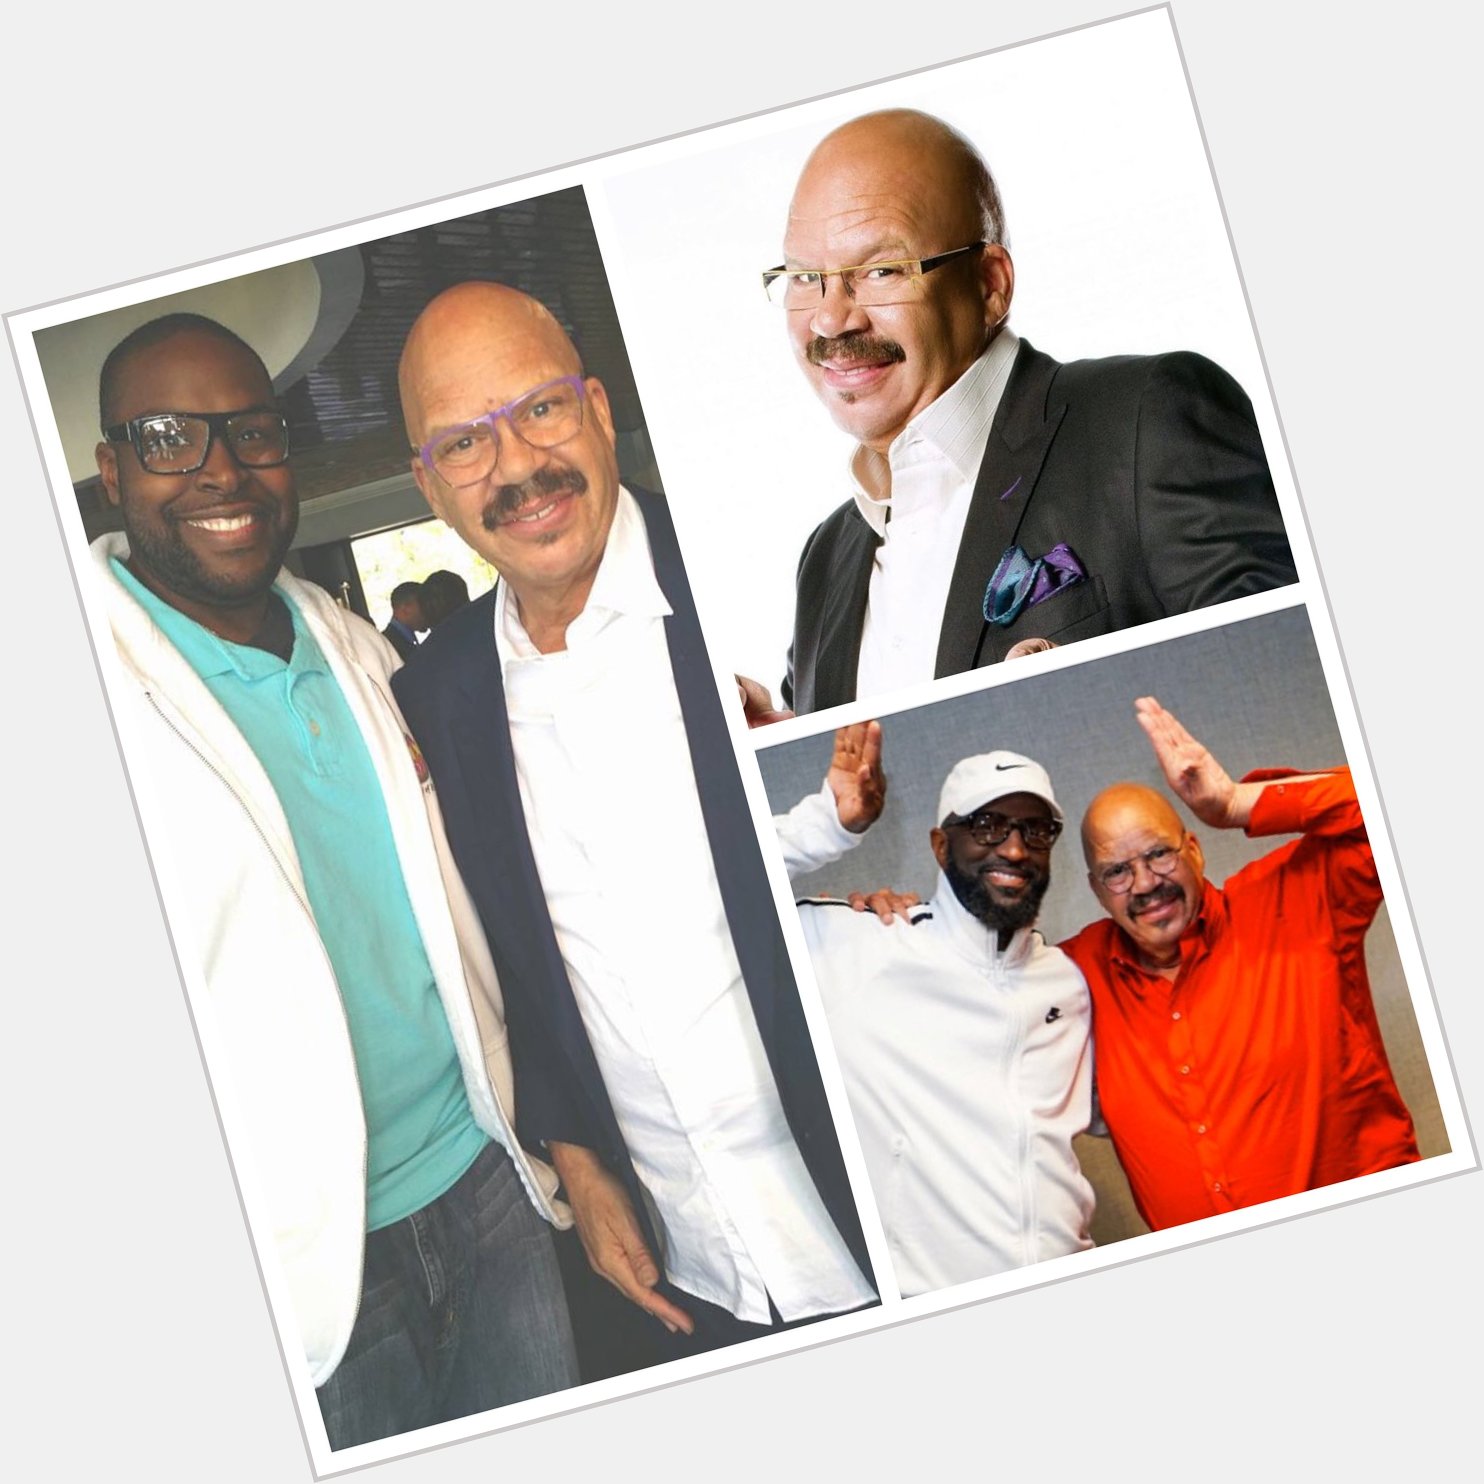 Happy 70th Birthday to the FlyJock Tom Joyner... continued Blessings 